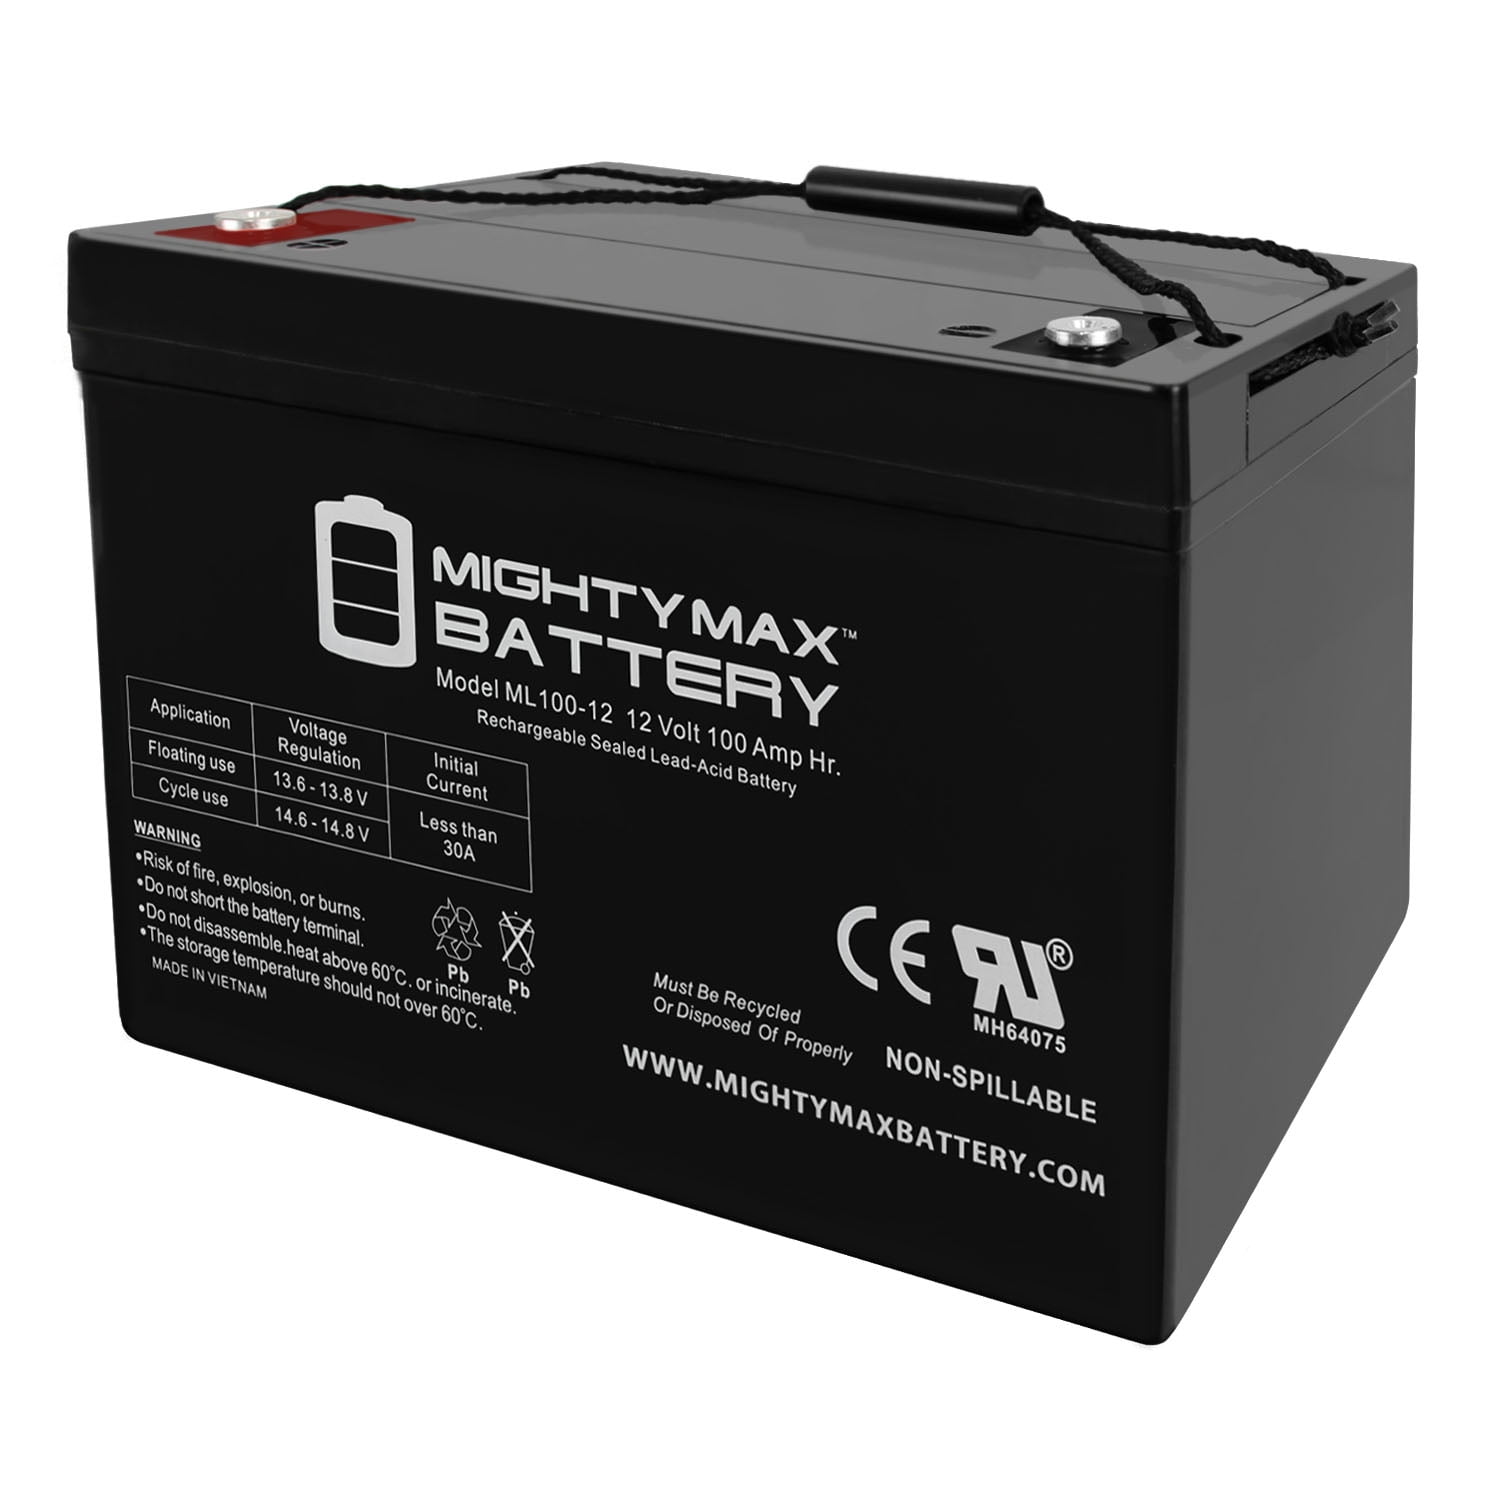 VMAXTANKS SLR200 Solar Wind Power Backup AGM Battery HiCapacity 2000ah for sale online 